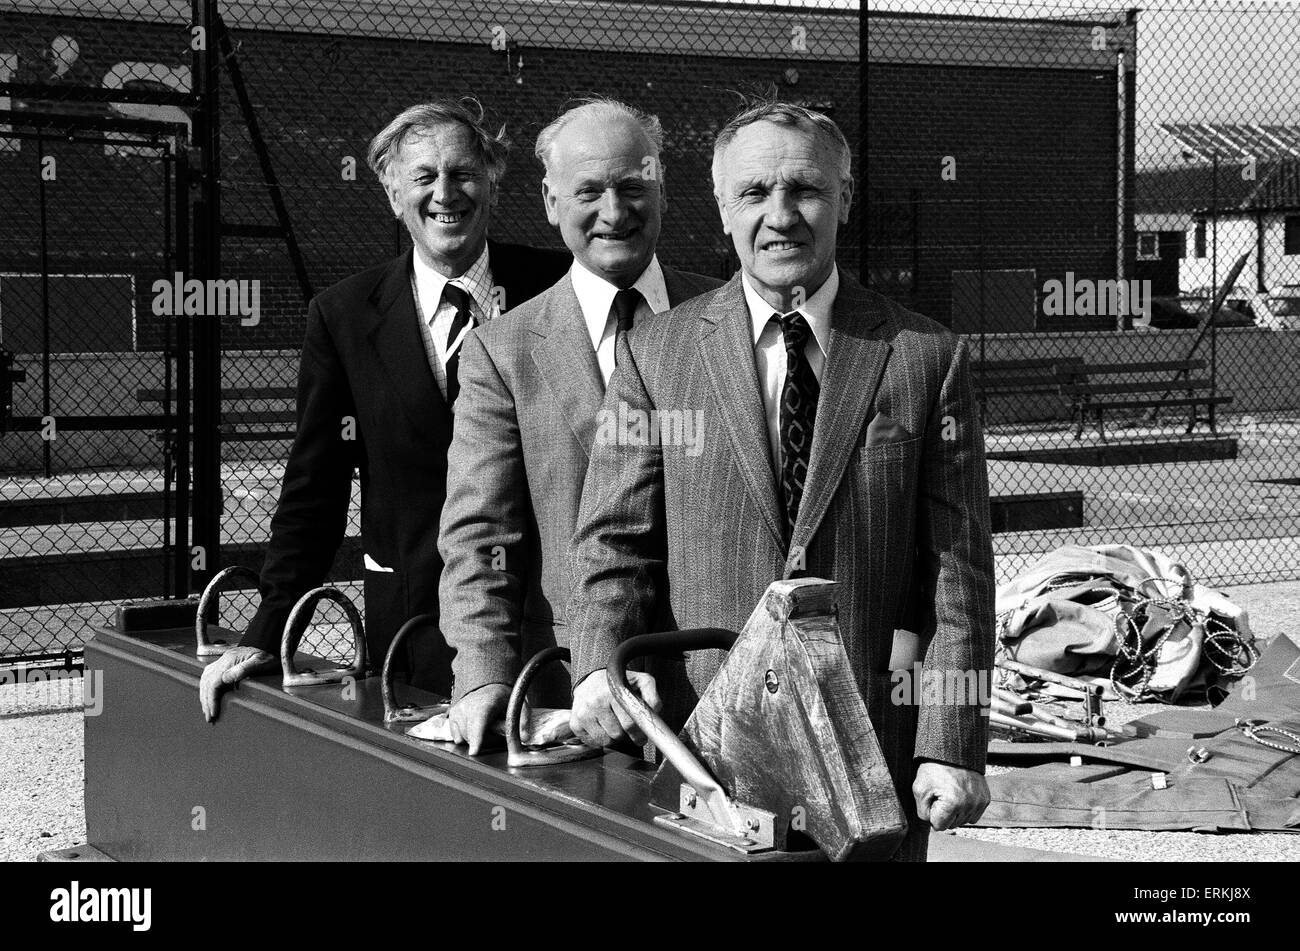 Bless Em All Week at Pontins, Blackpool. Three former football managers who attended the sports quiz left to right: Joe Mercer, Tom Finney and Bill Shankly. 5th May 1980. Stock Photo